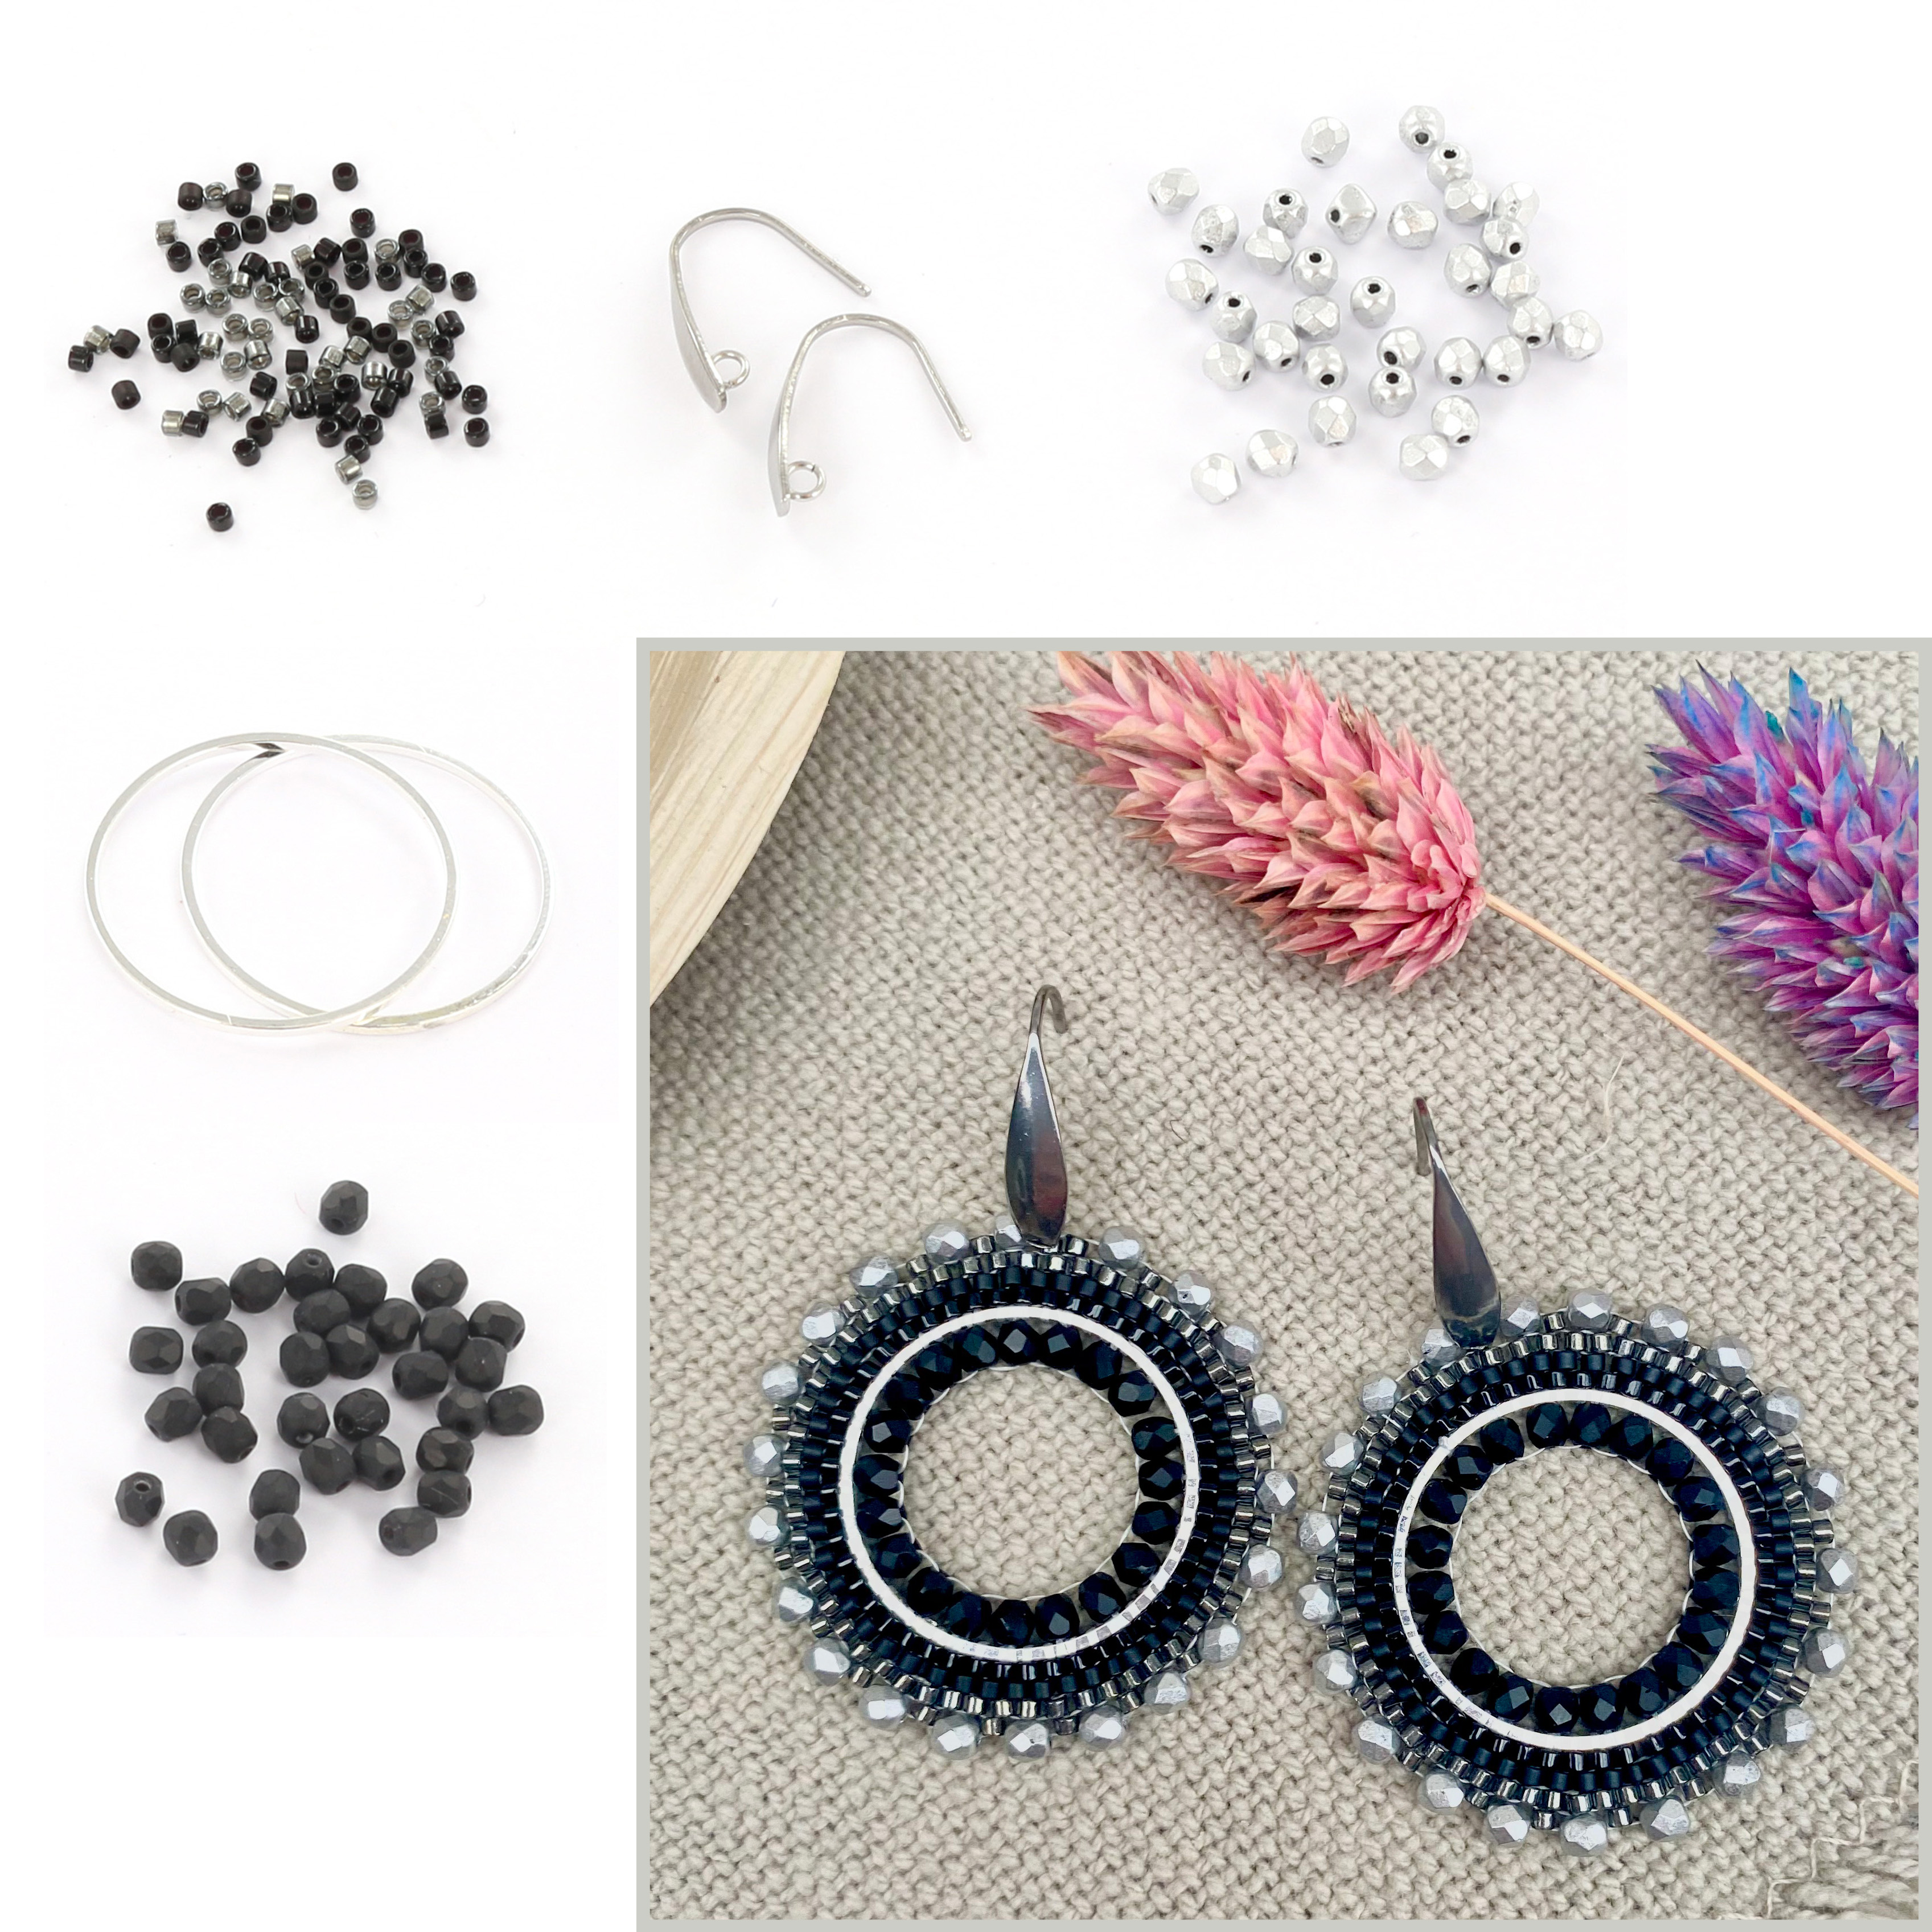 Extra pictures DIY kit round earrings - black and silver